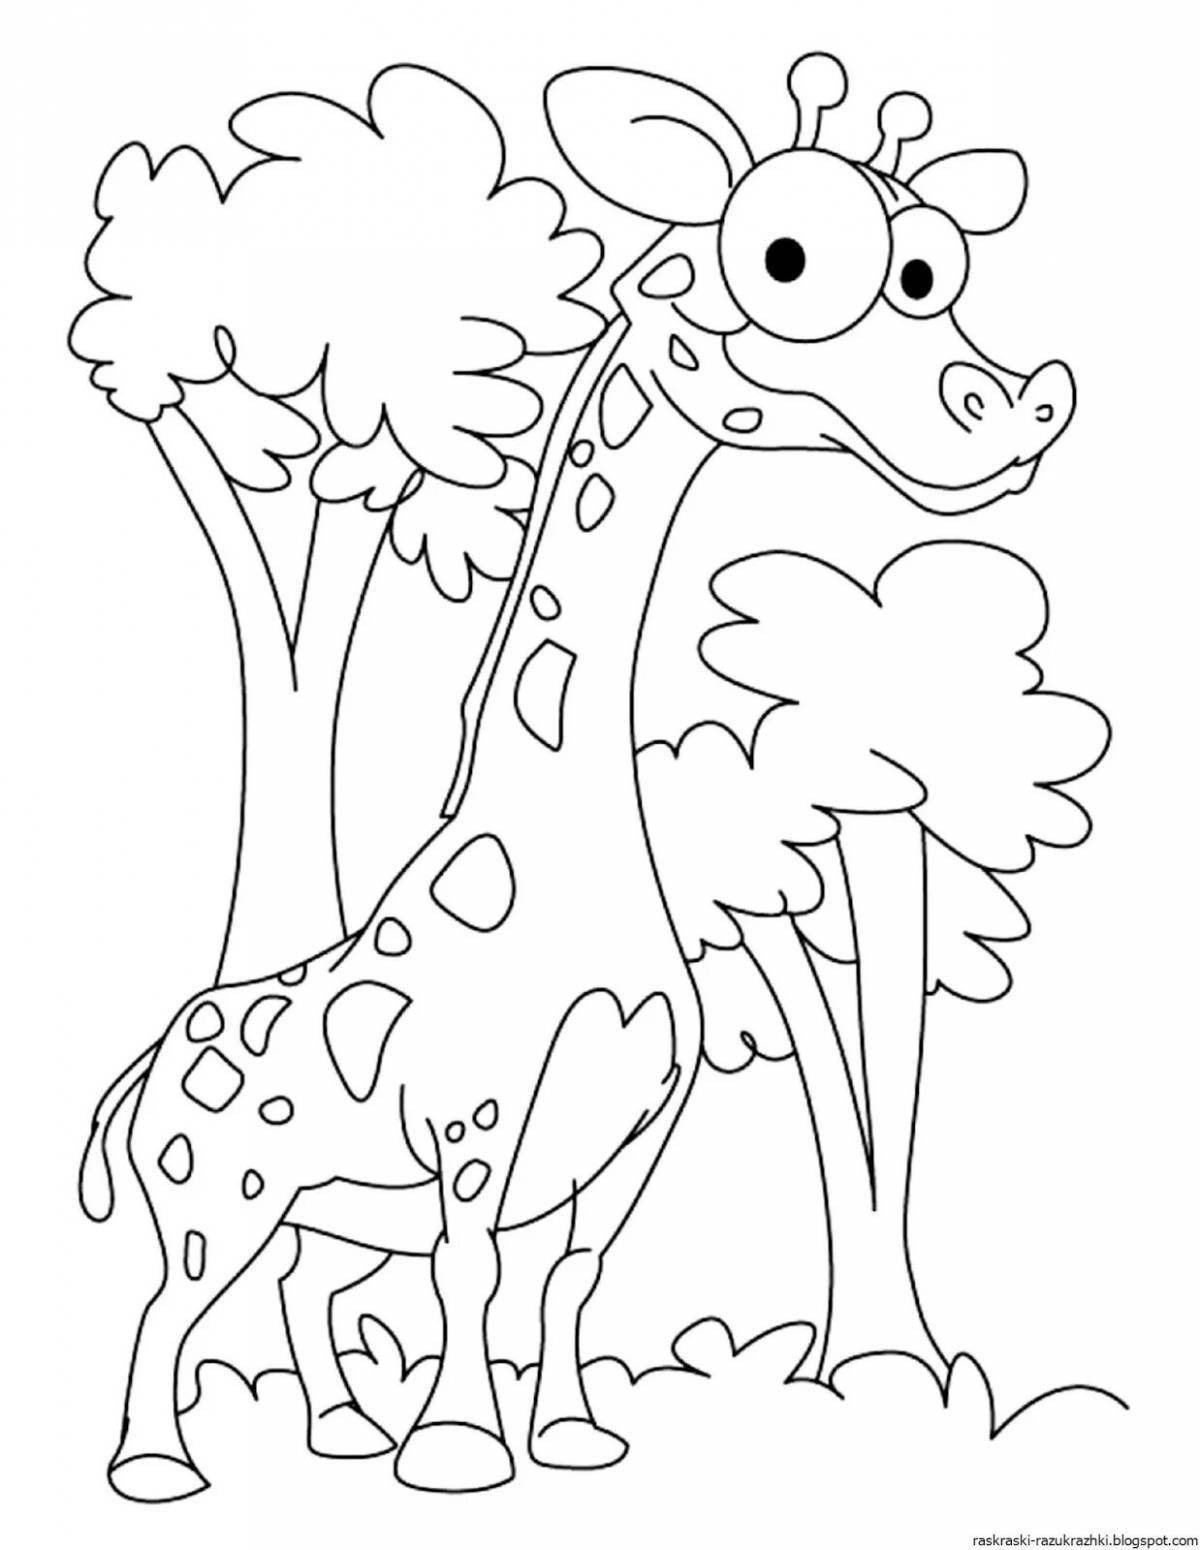 Adorable animal coloring book for 5 year olds